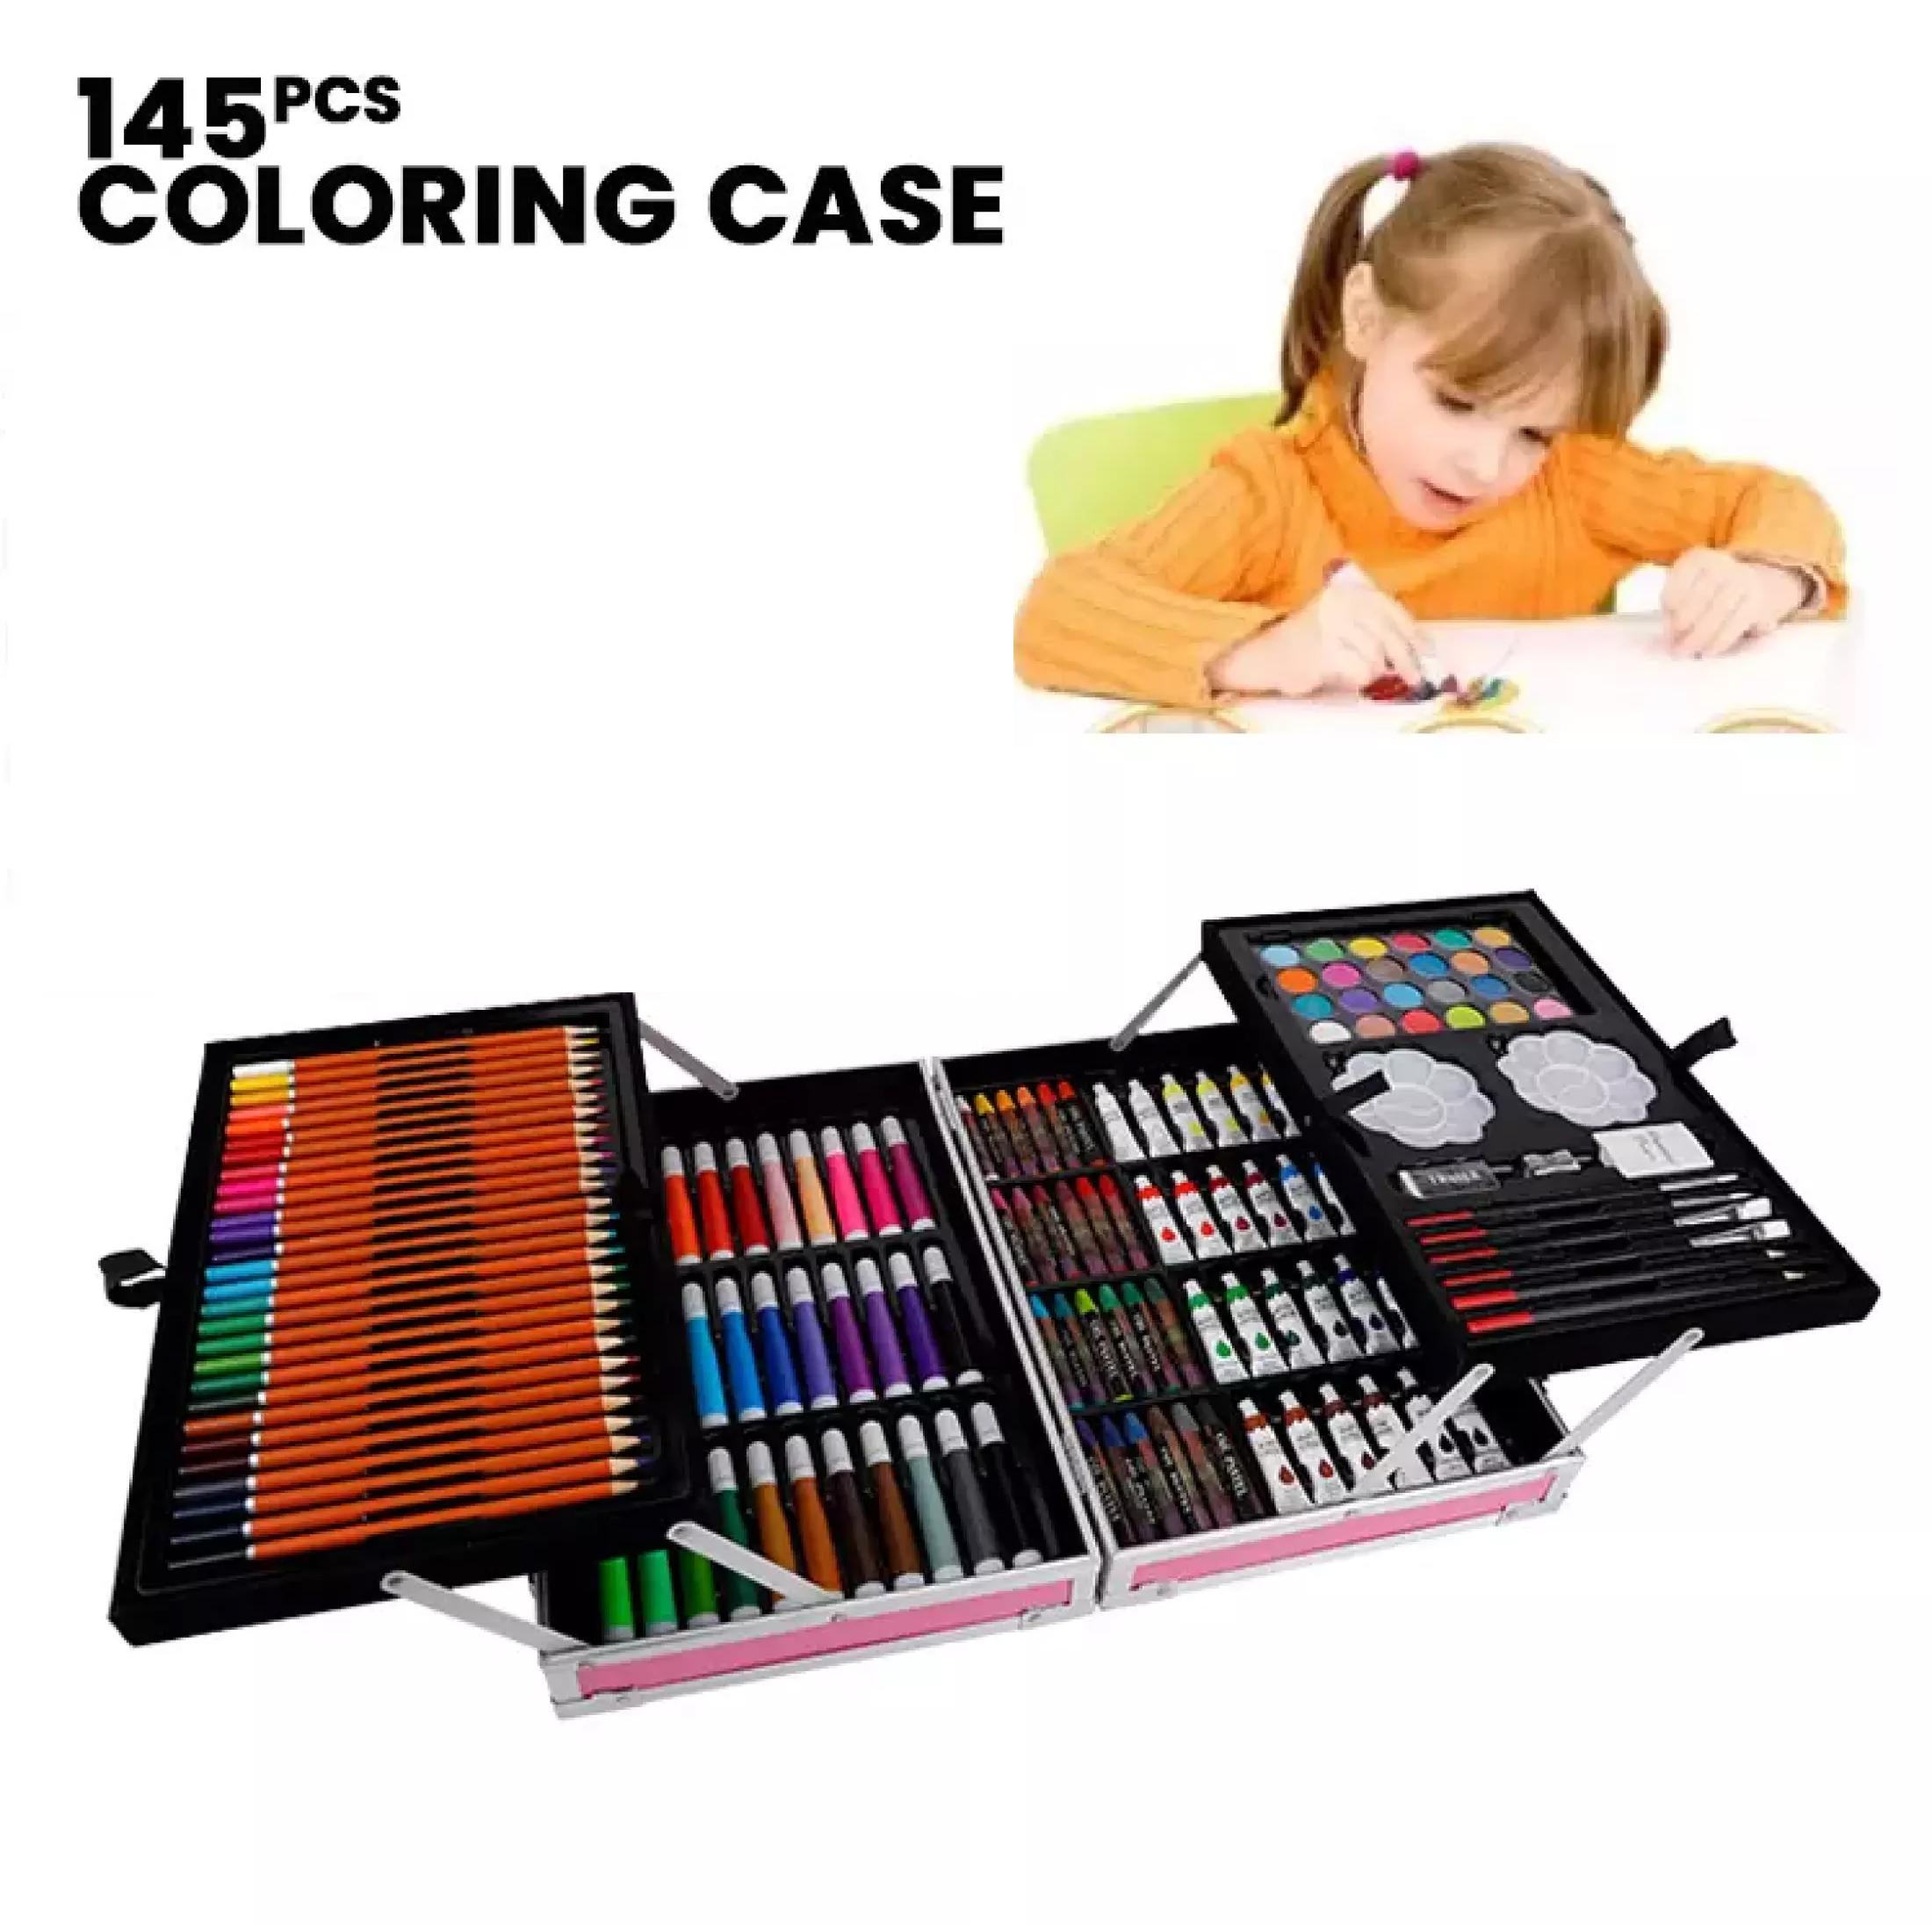 145 Pieces Art Set Drawing Painting Set for kids, Portable Aluminum Case  for Kids and Artist, Drawing and painting Kit - Random Color